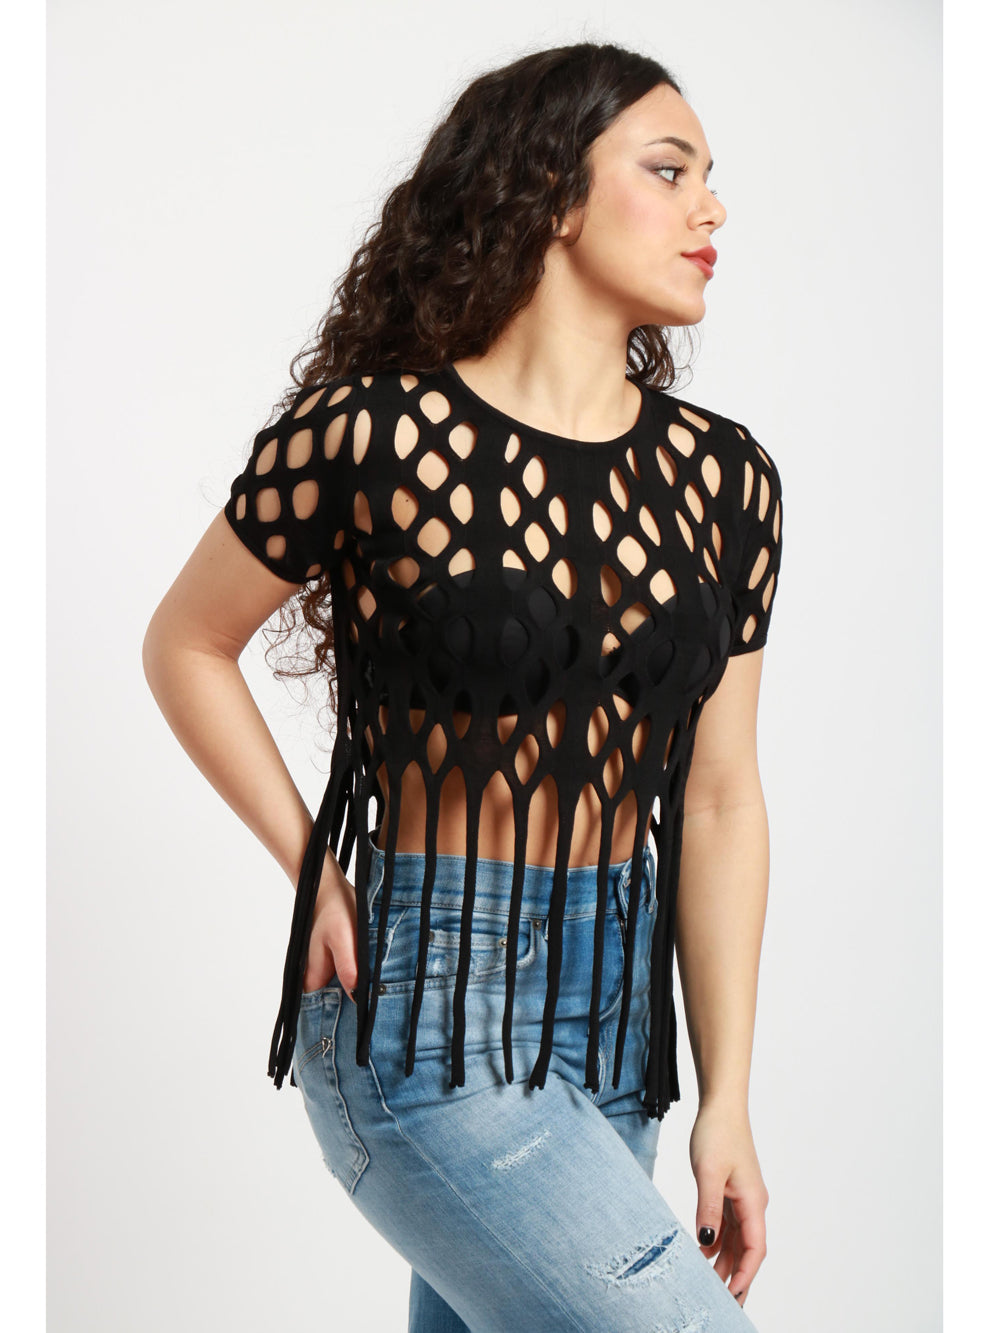 Hamlet Round Neck T-Shirt in Black Mesh with Fringes